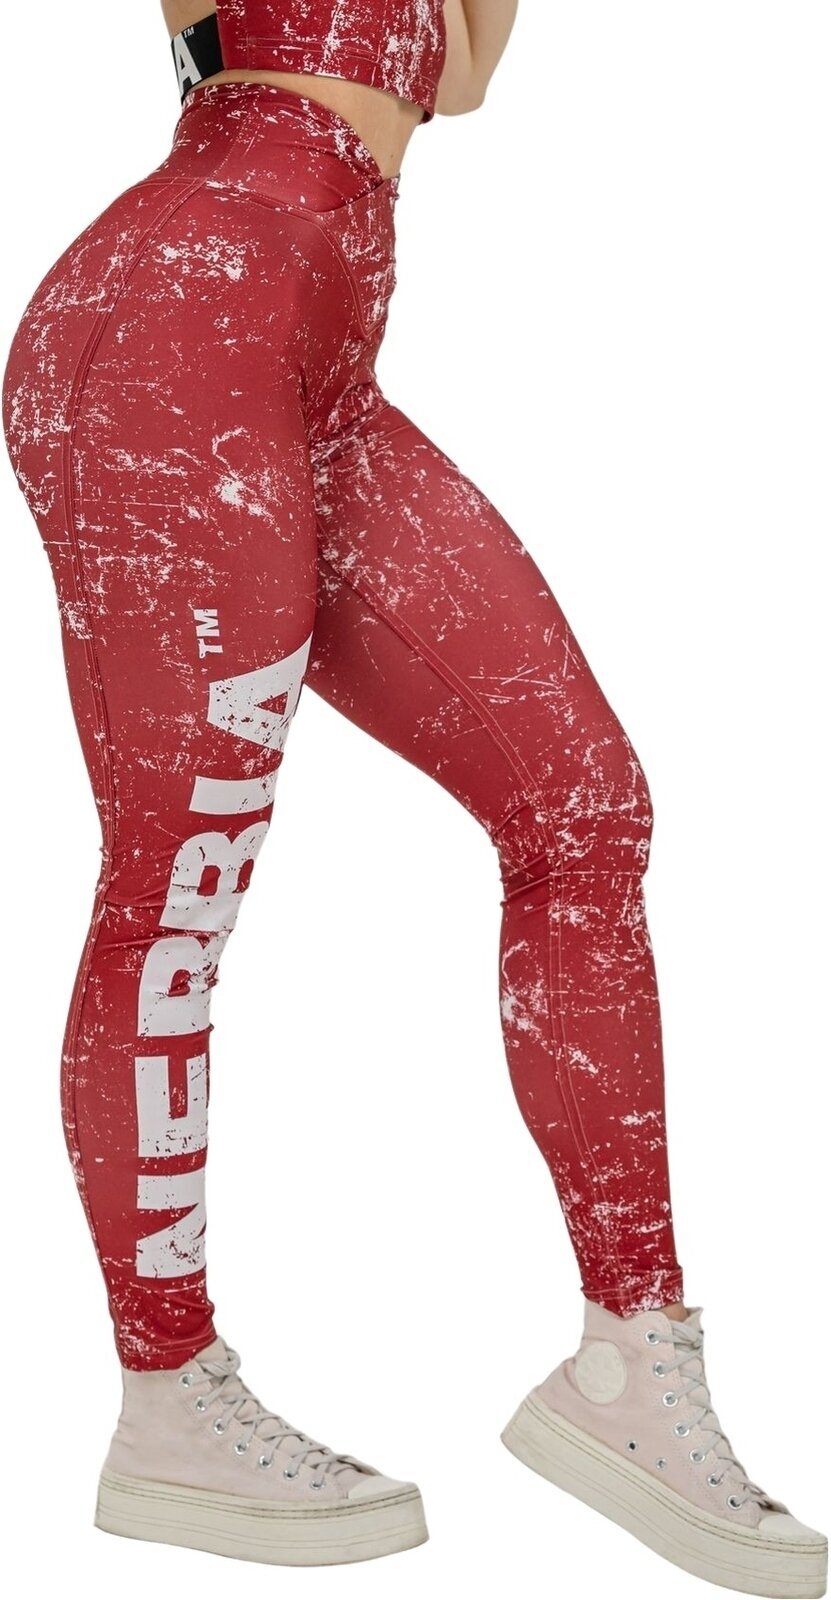 Fitness Trousers Nebbia Workout Leggings Rough Girl Red M Fitness Trousers